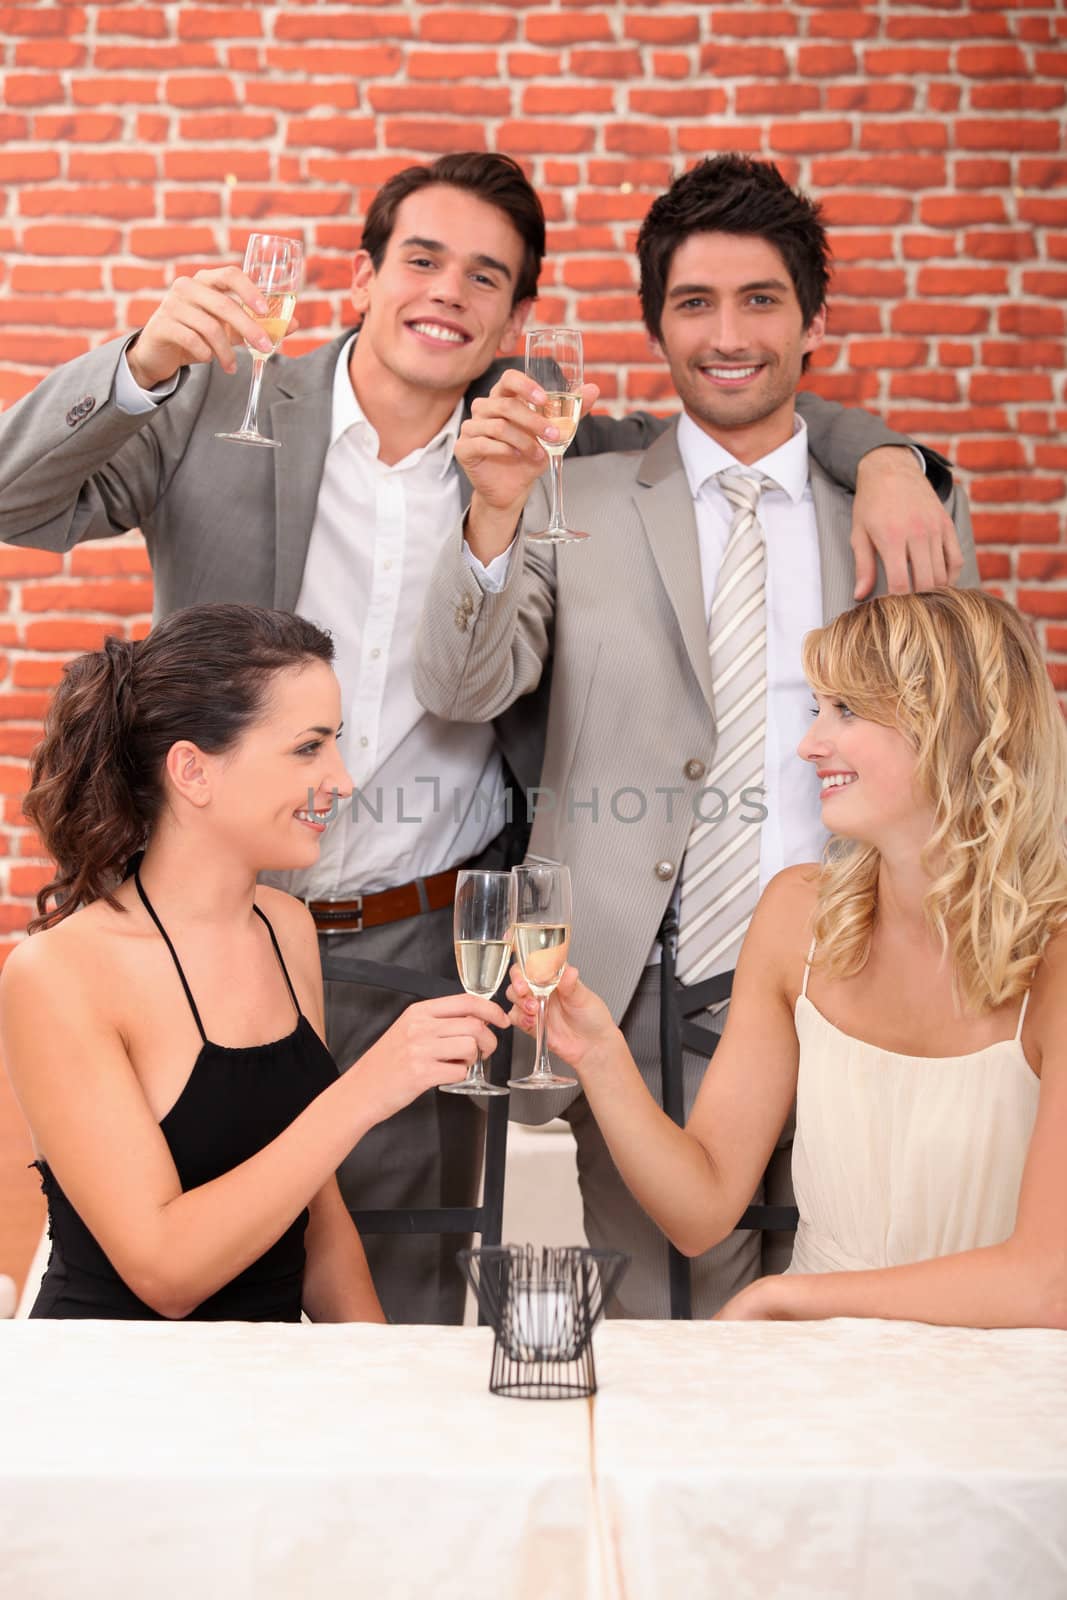 Friends making a toast